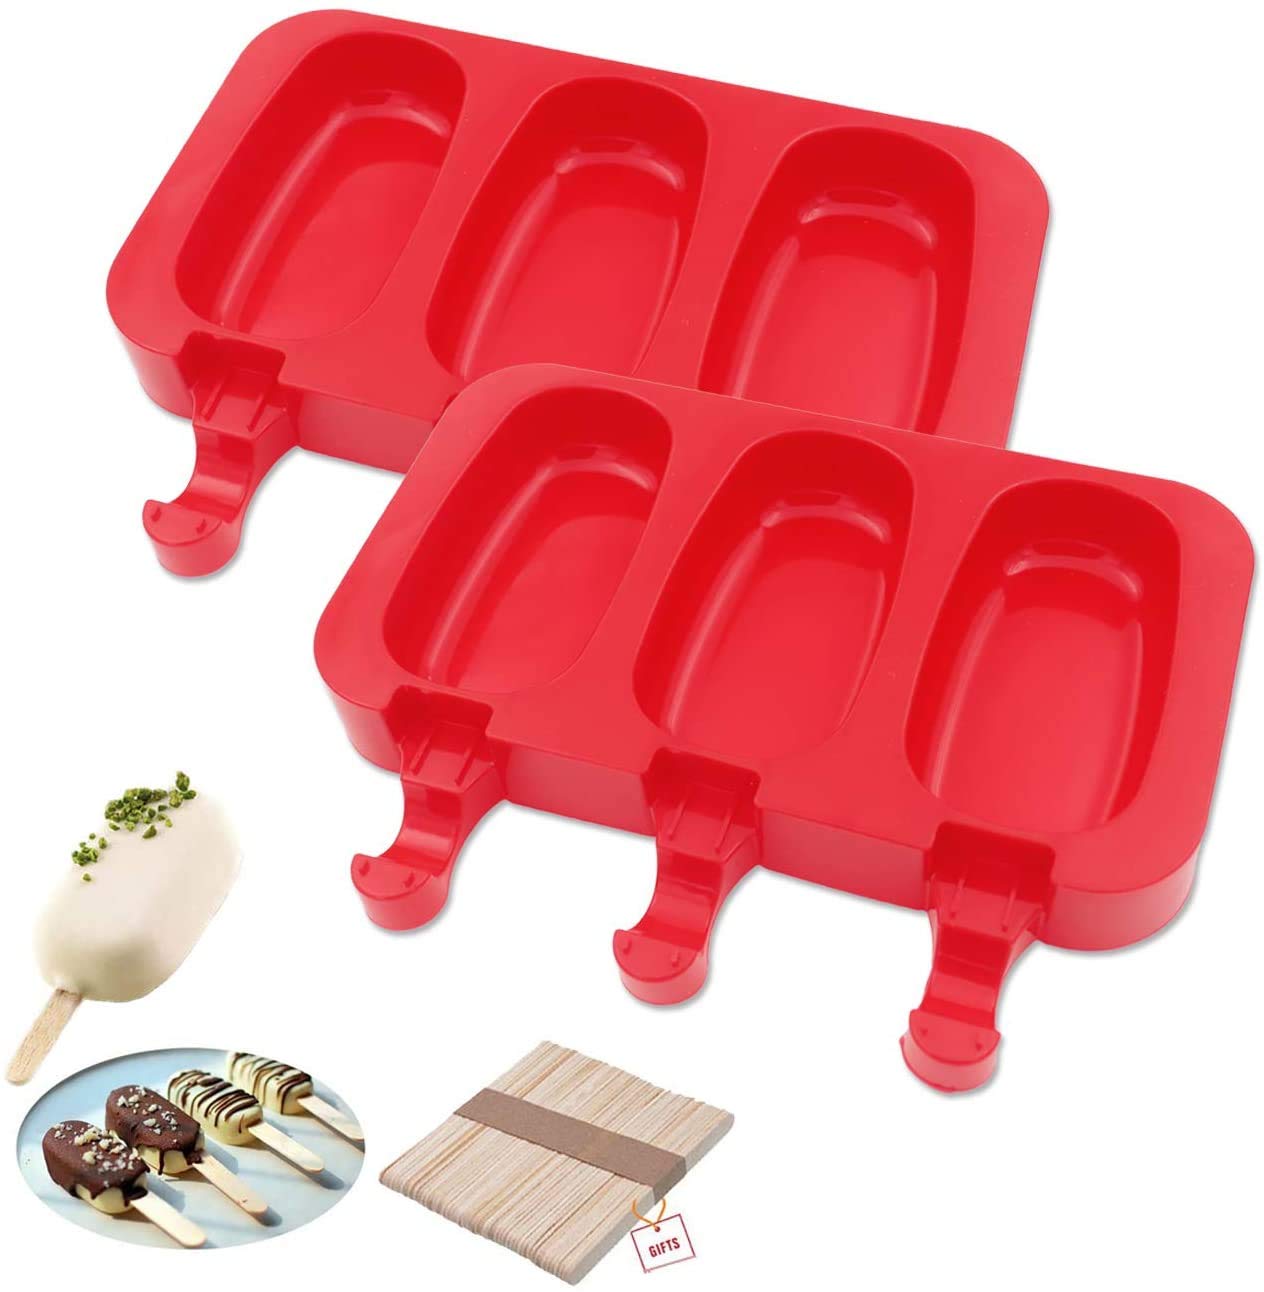 Zollyss 3 Cavities Silicone Popsicle Molds, BPA Free Homemade Ice